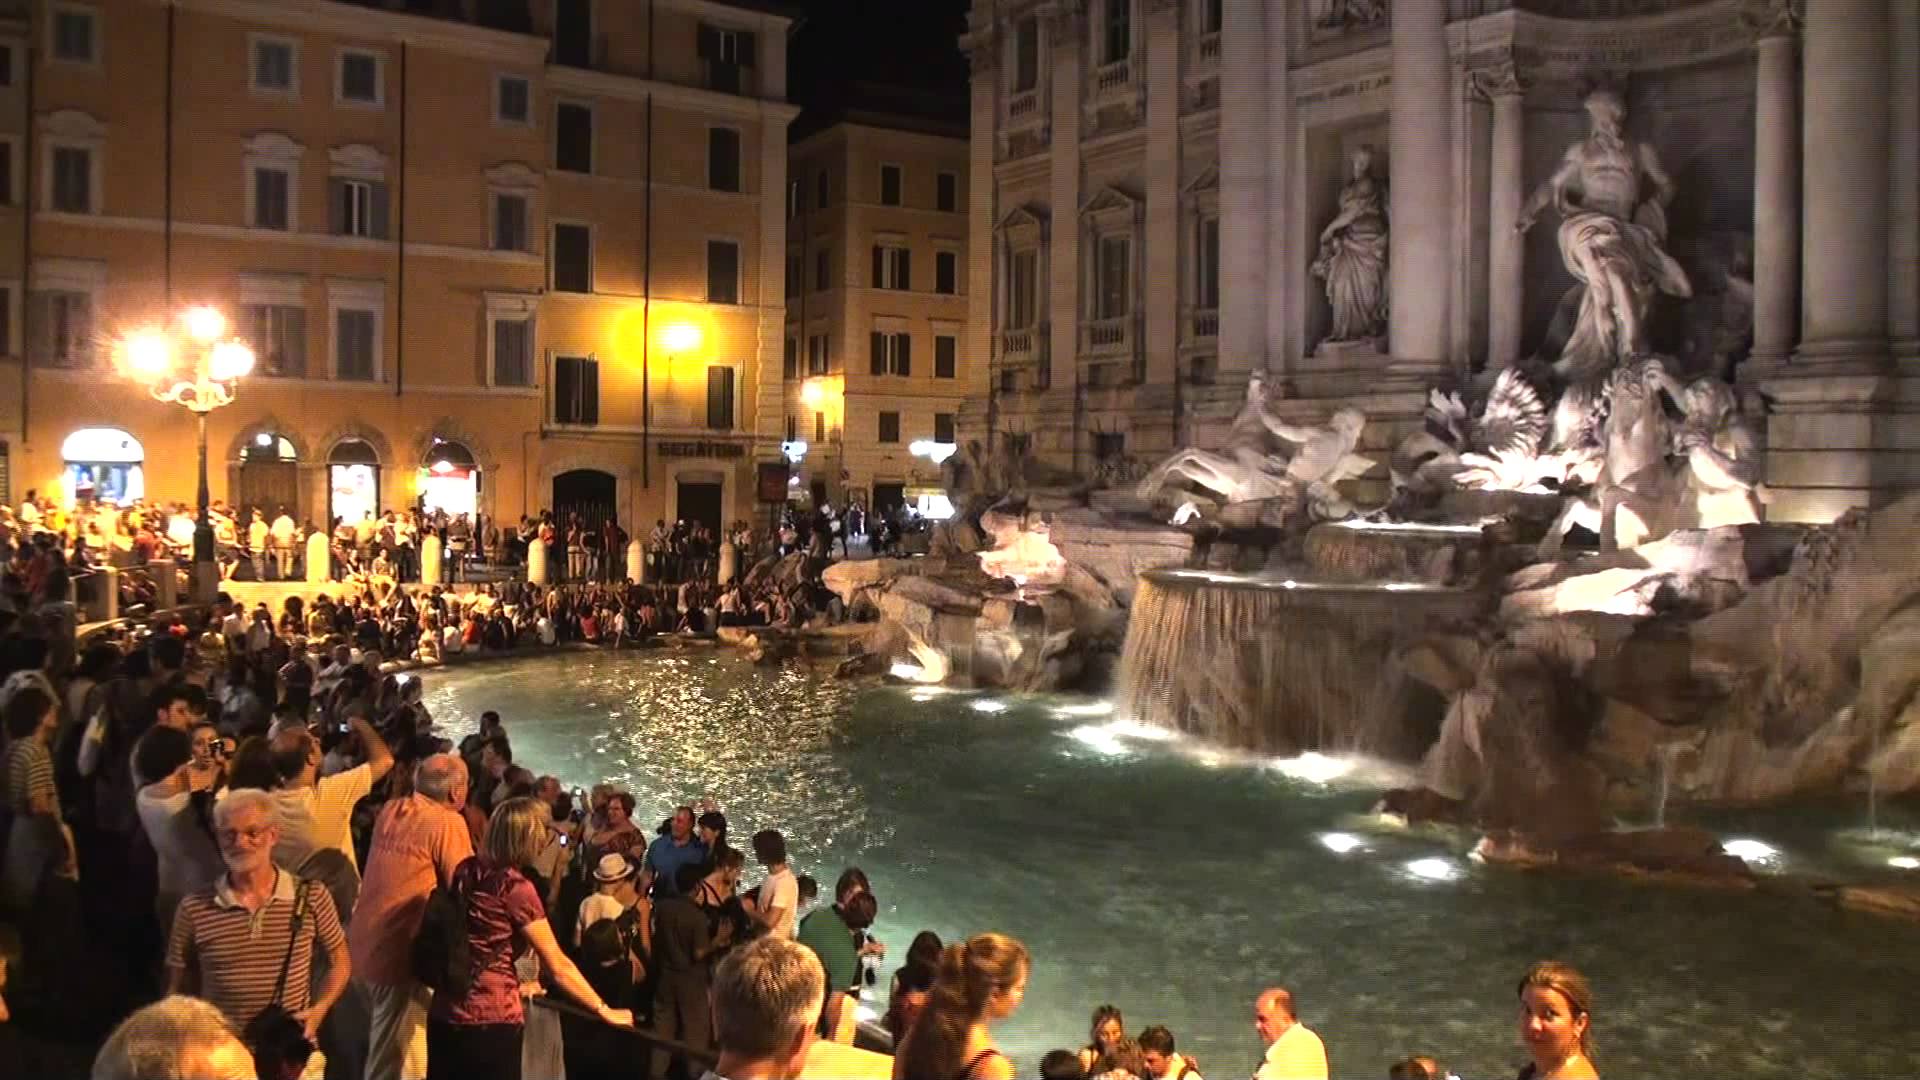 Trip to Rome - Trevi Fountain at night 1080p - YouTube